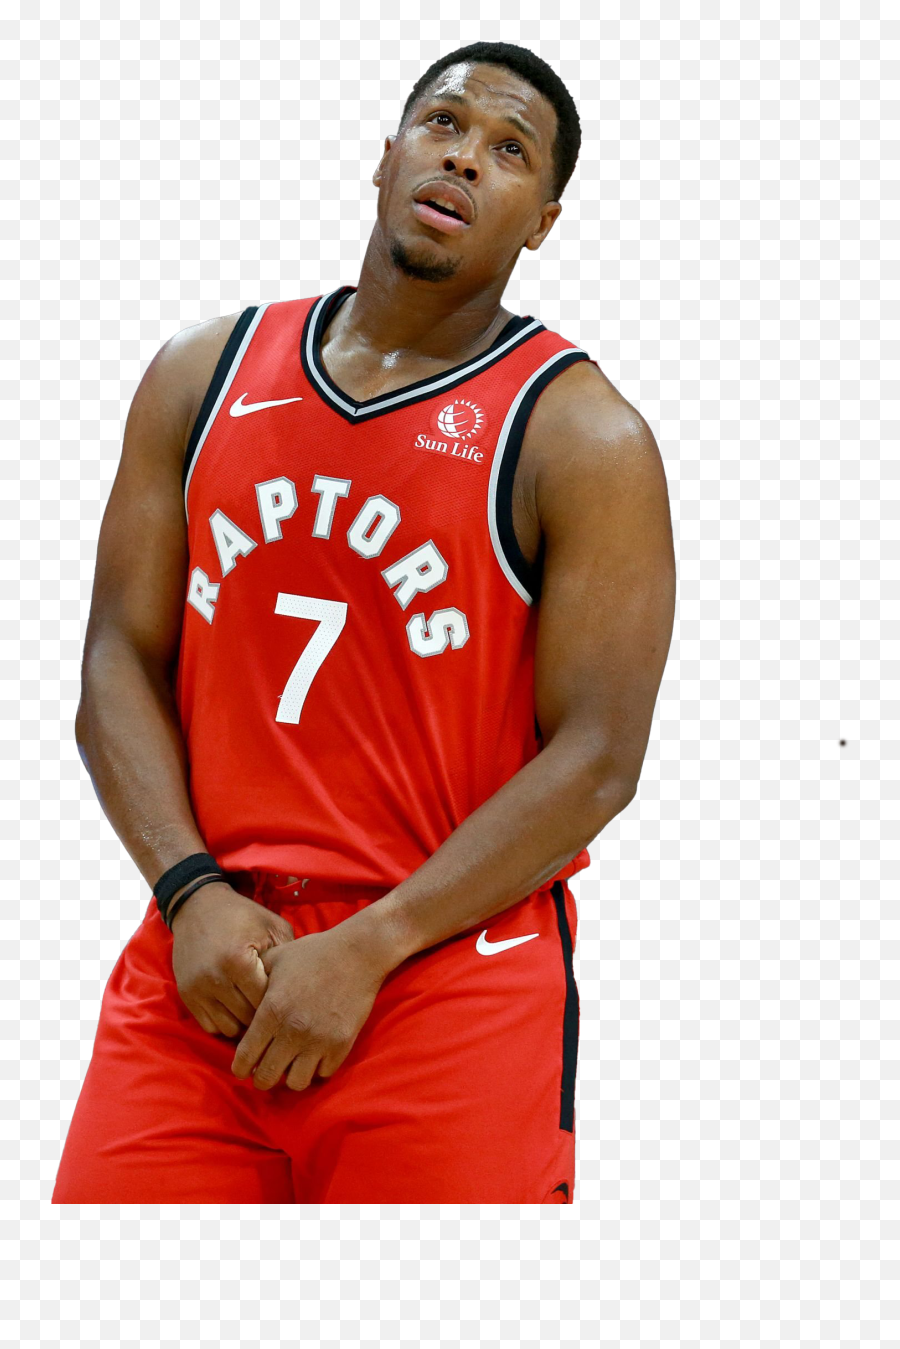 Kyle Lowry Png Image Background - Kyle Lowry Transparent Background,Kyle Lowry Png